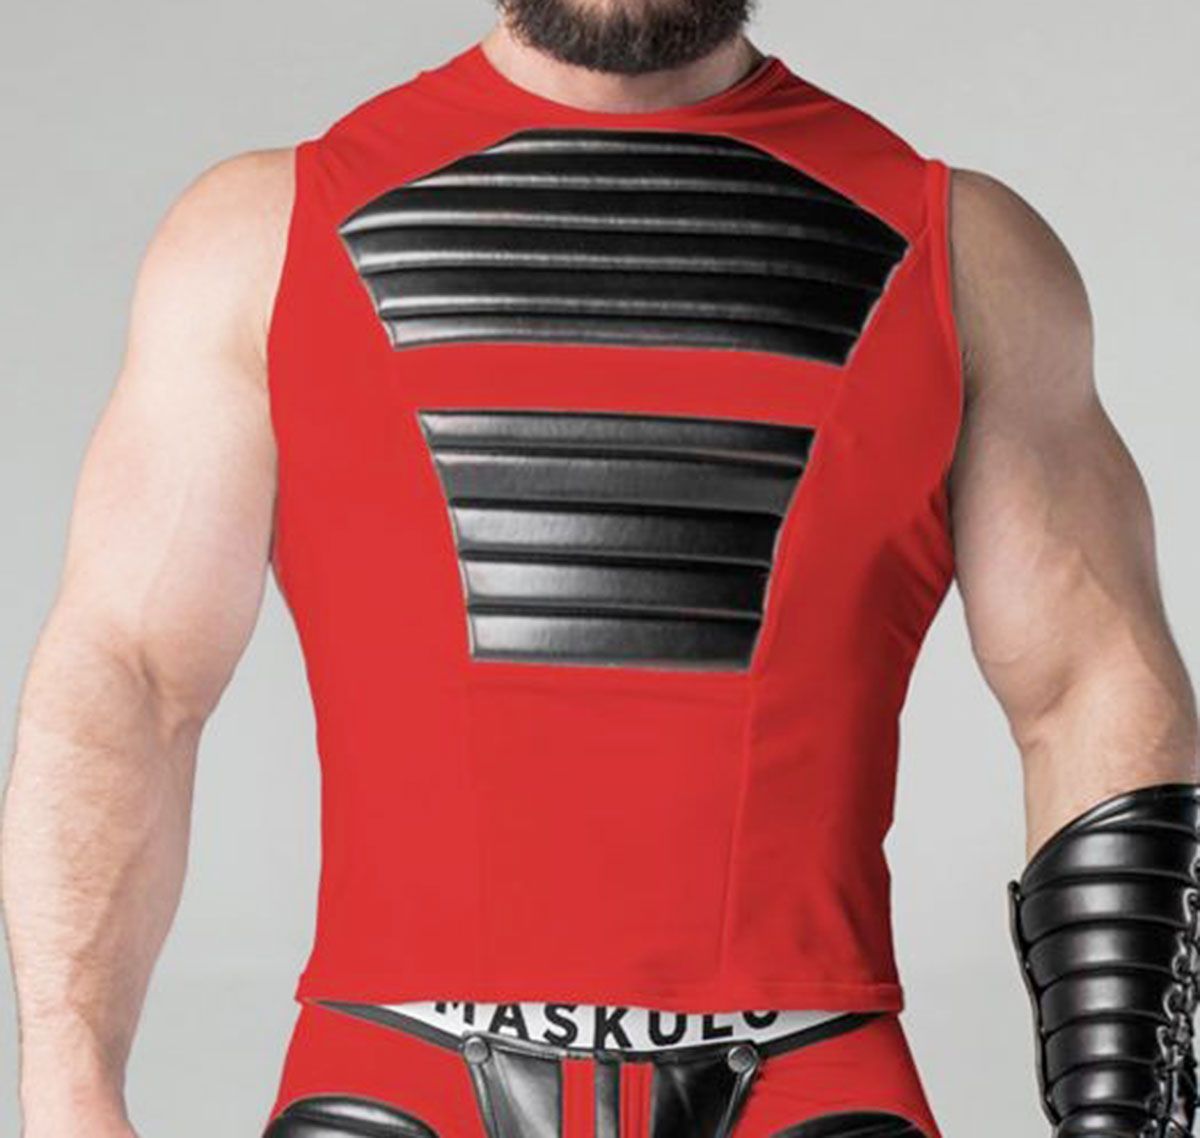 MASKULO Fetish Tank Top ARMORED. TP20-10, red